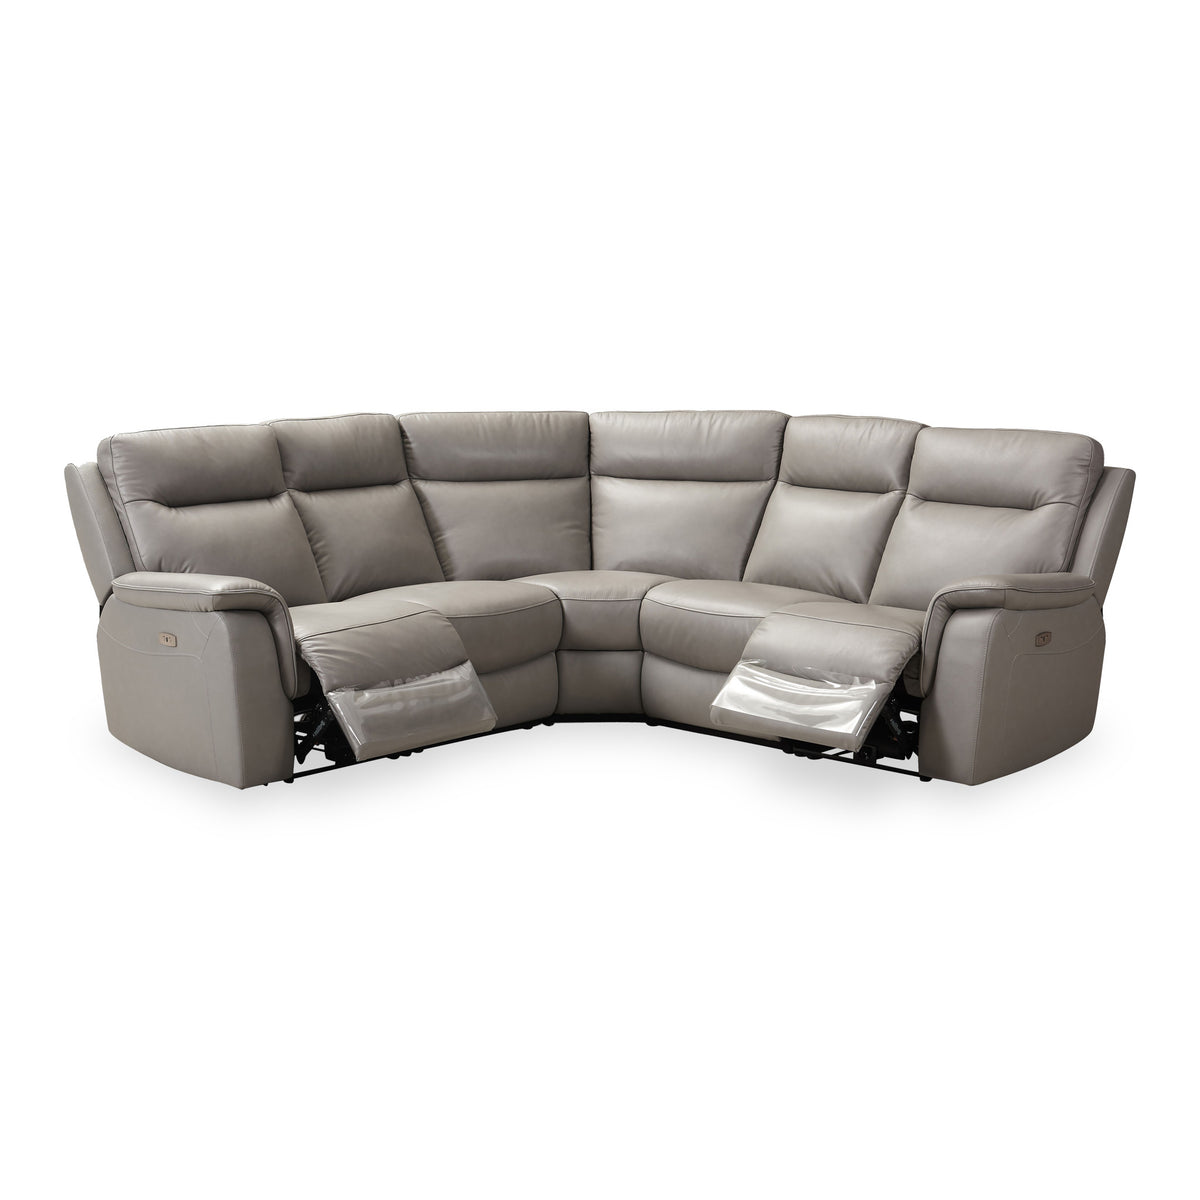 Walter Grey Leather Electric Reclining Large Corner Sofa from Roseland